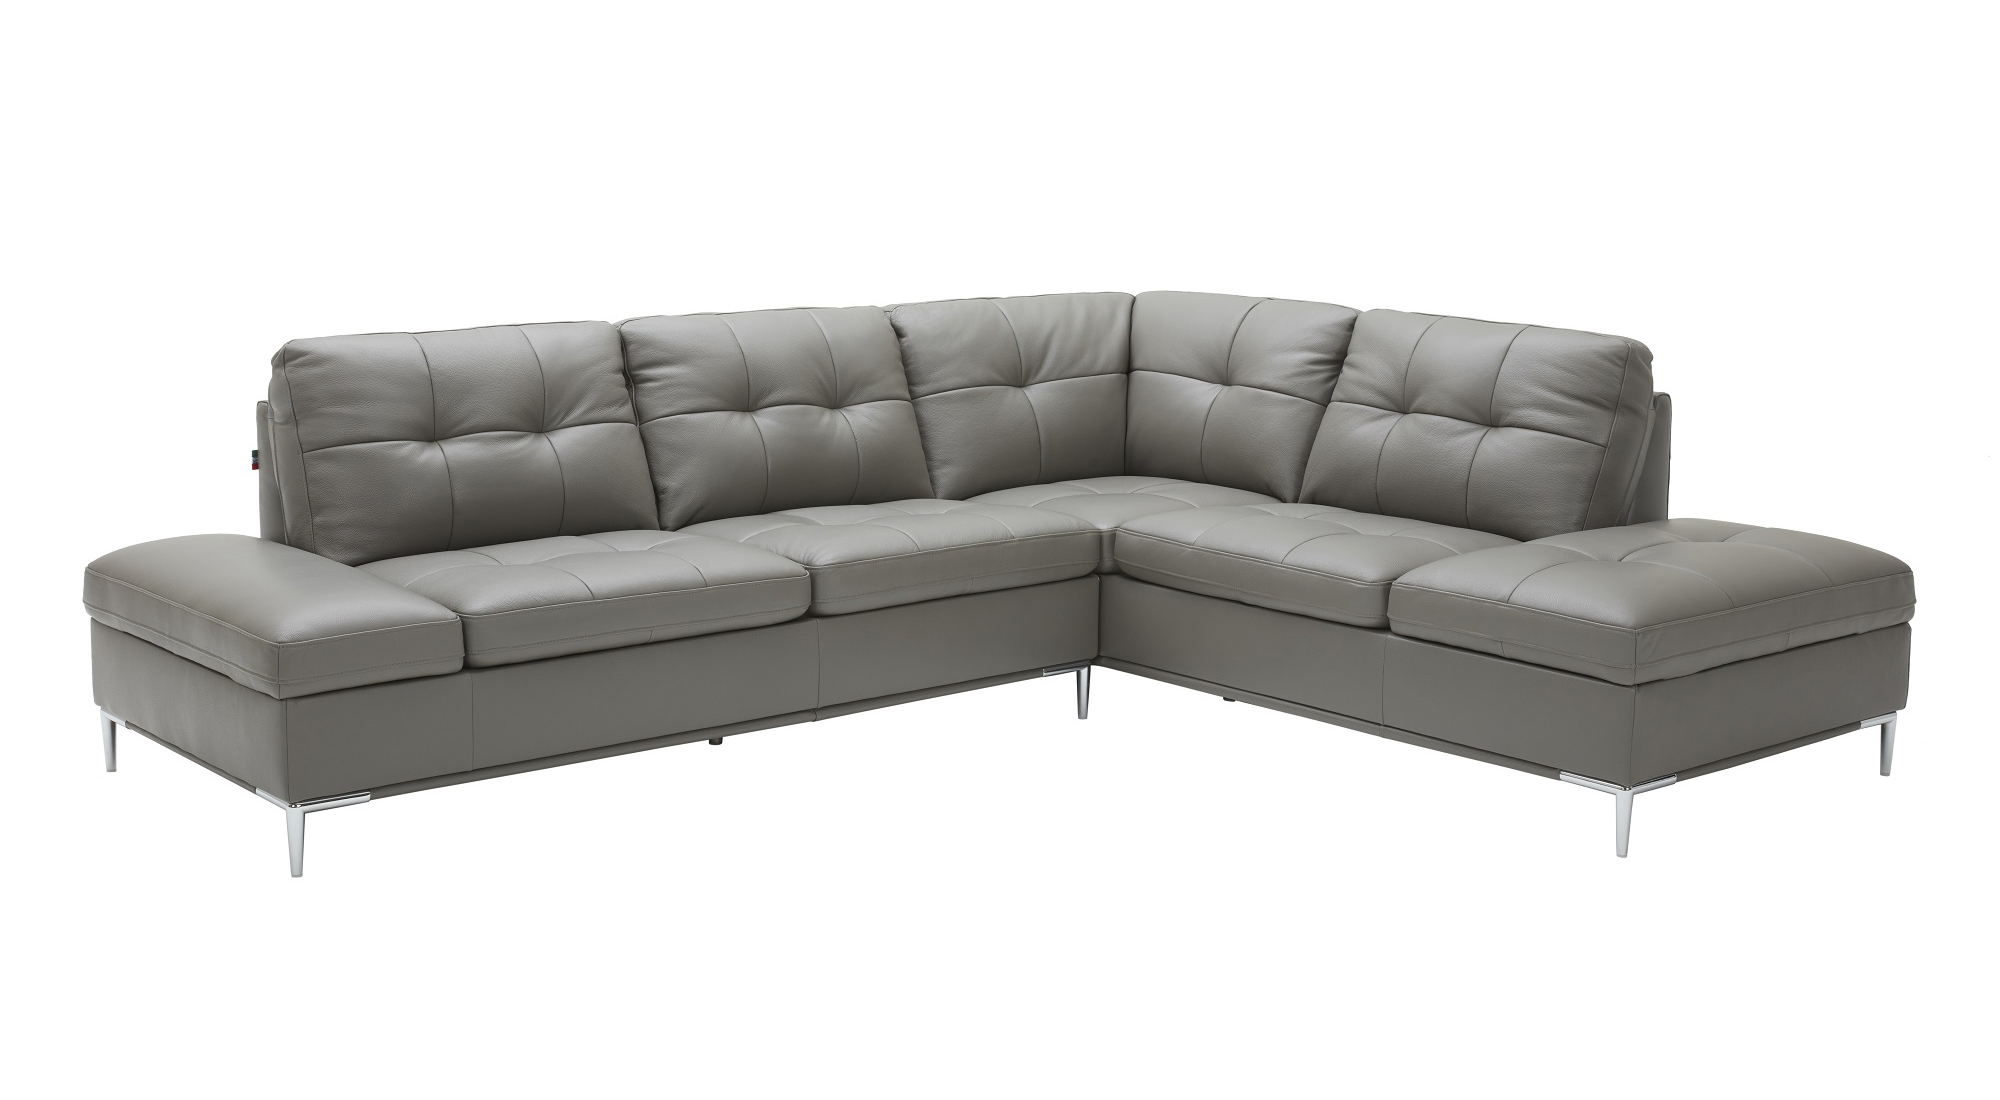 Sophisticated Leather Sectional with Chaise with Pillows